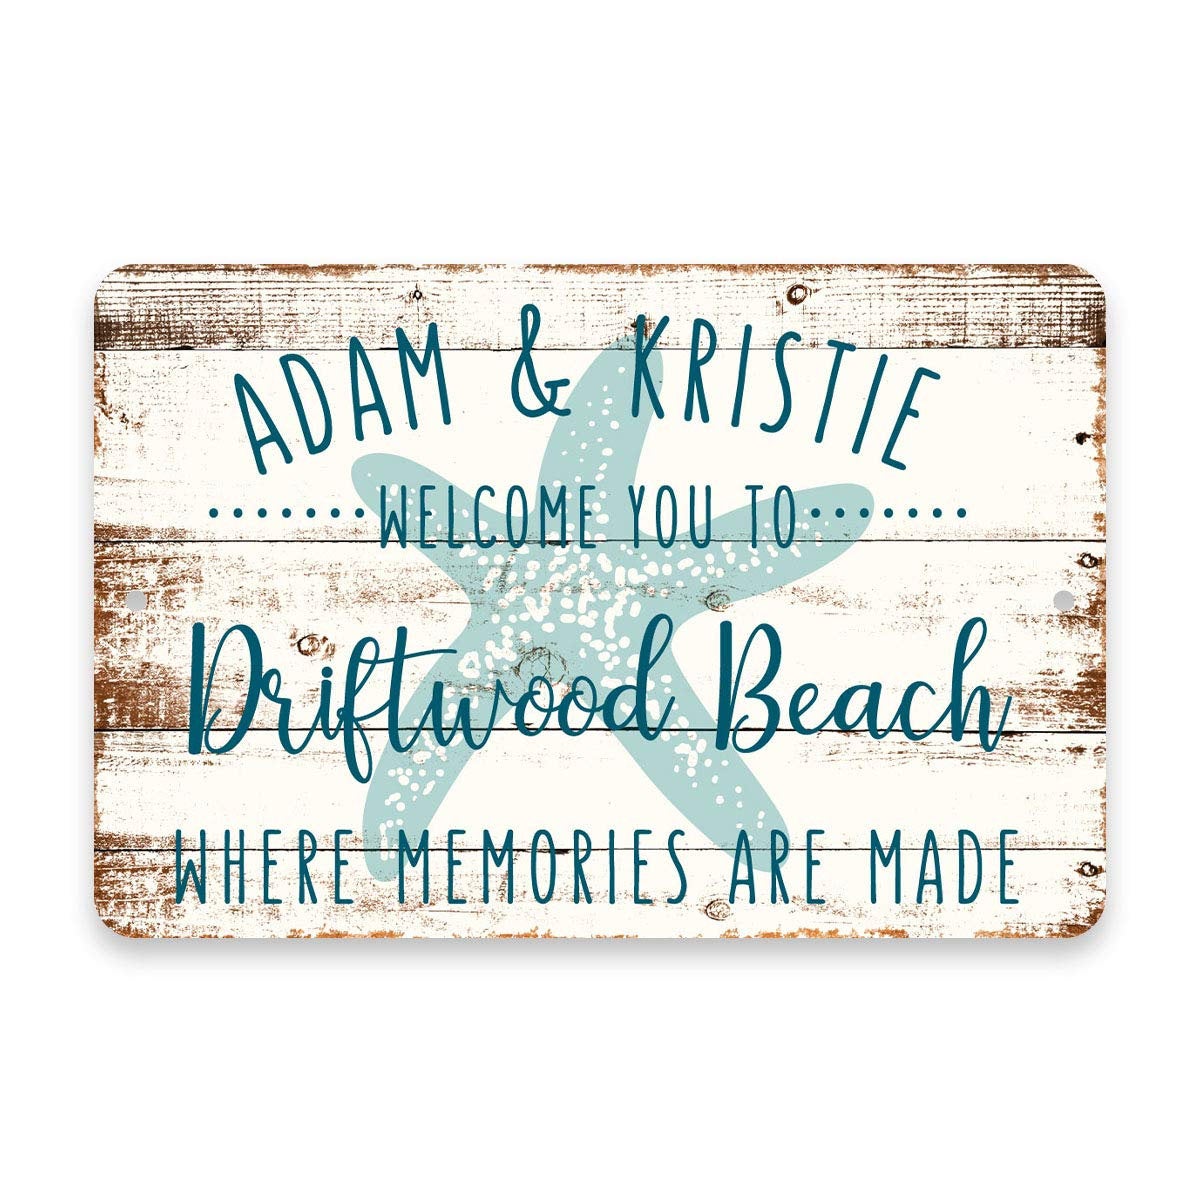 Personalized Welcome to Driftwood Beach Where Memories are Made Sign - 8 X 12 Metal Sign with Wood Look